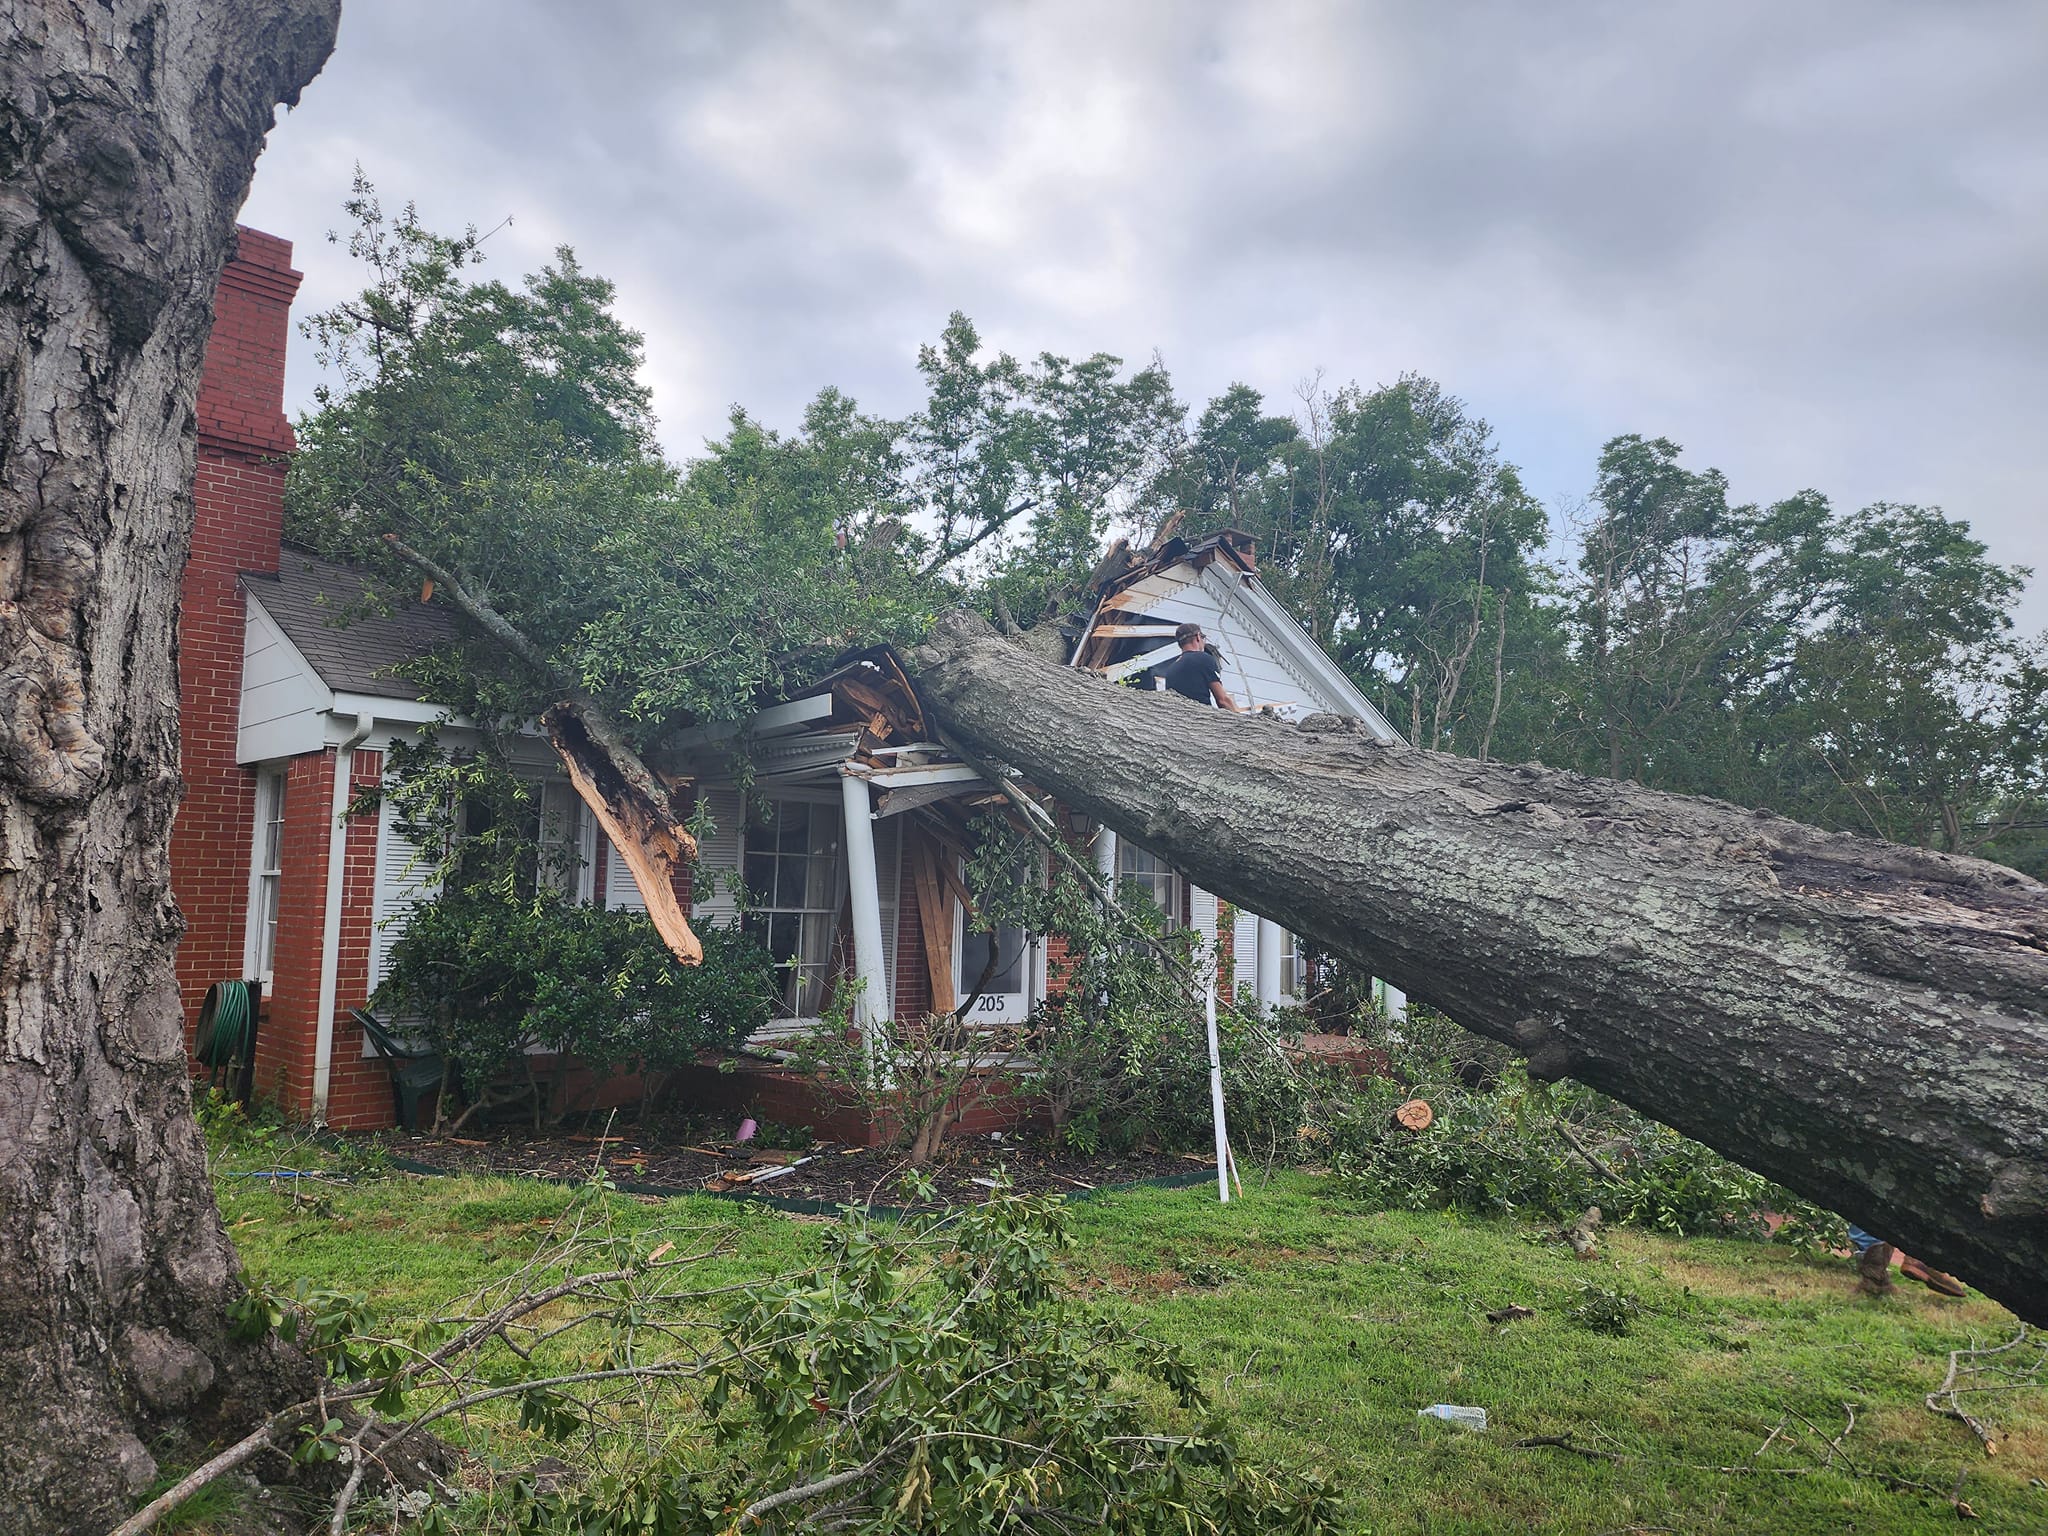 Severe storms leave areas of Winnsboro without power, water